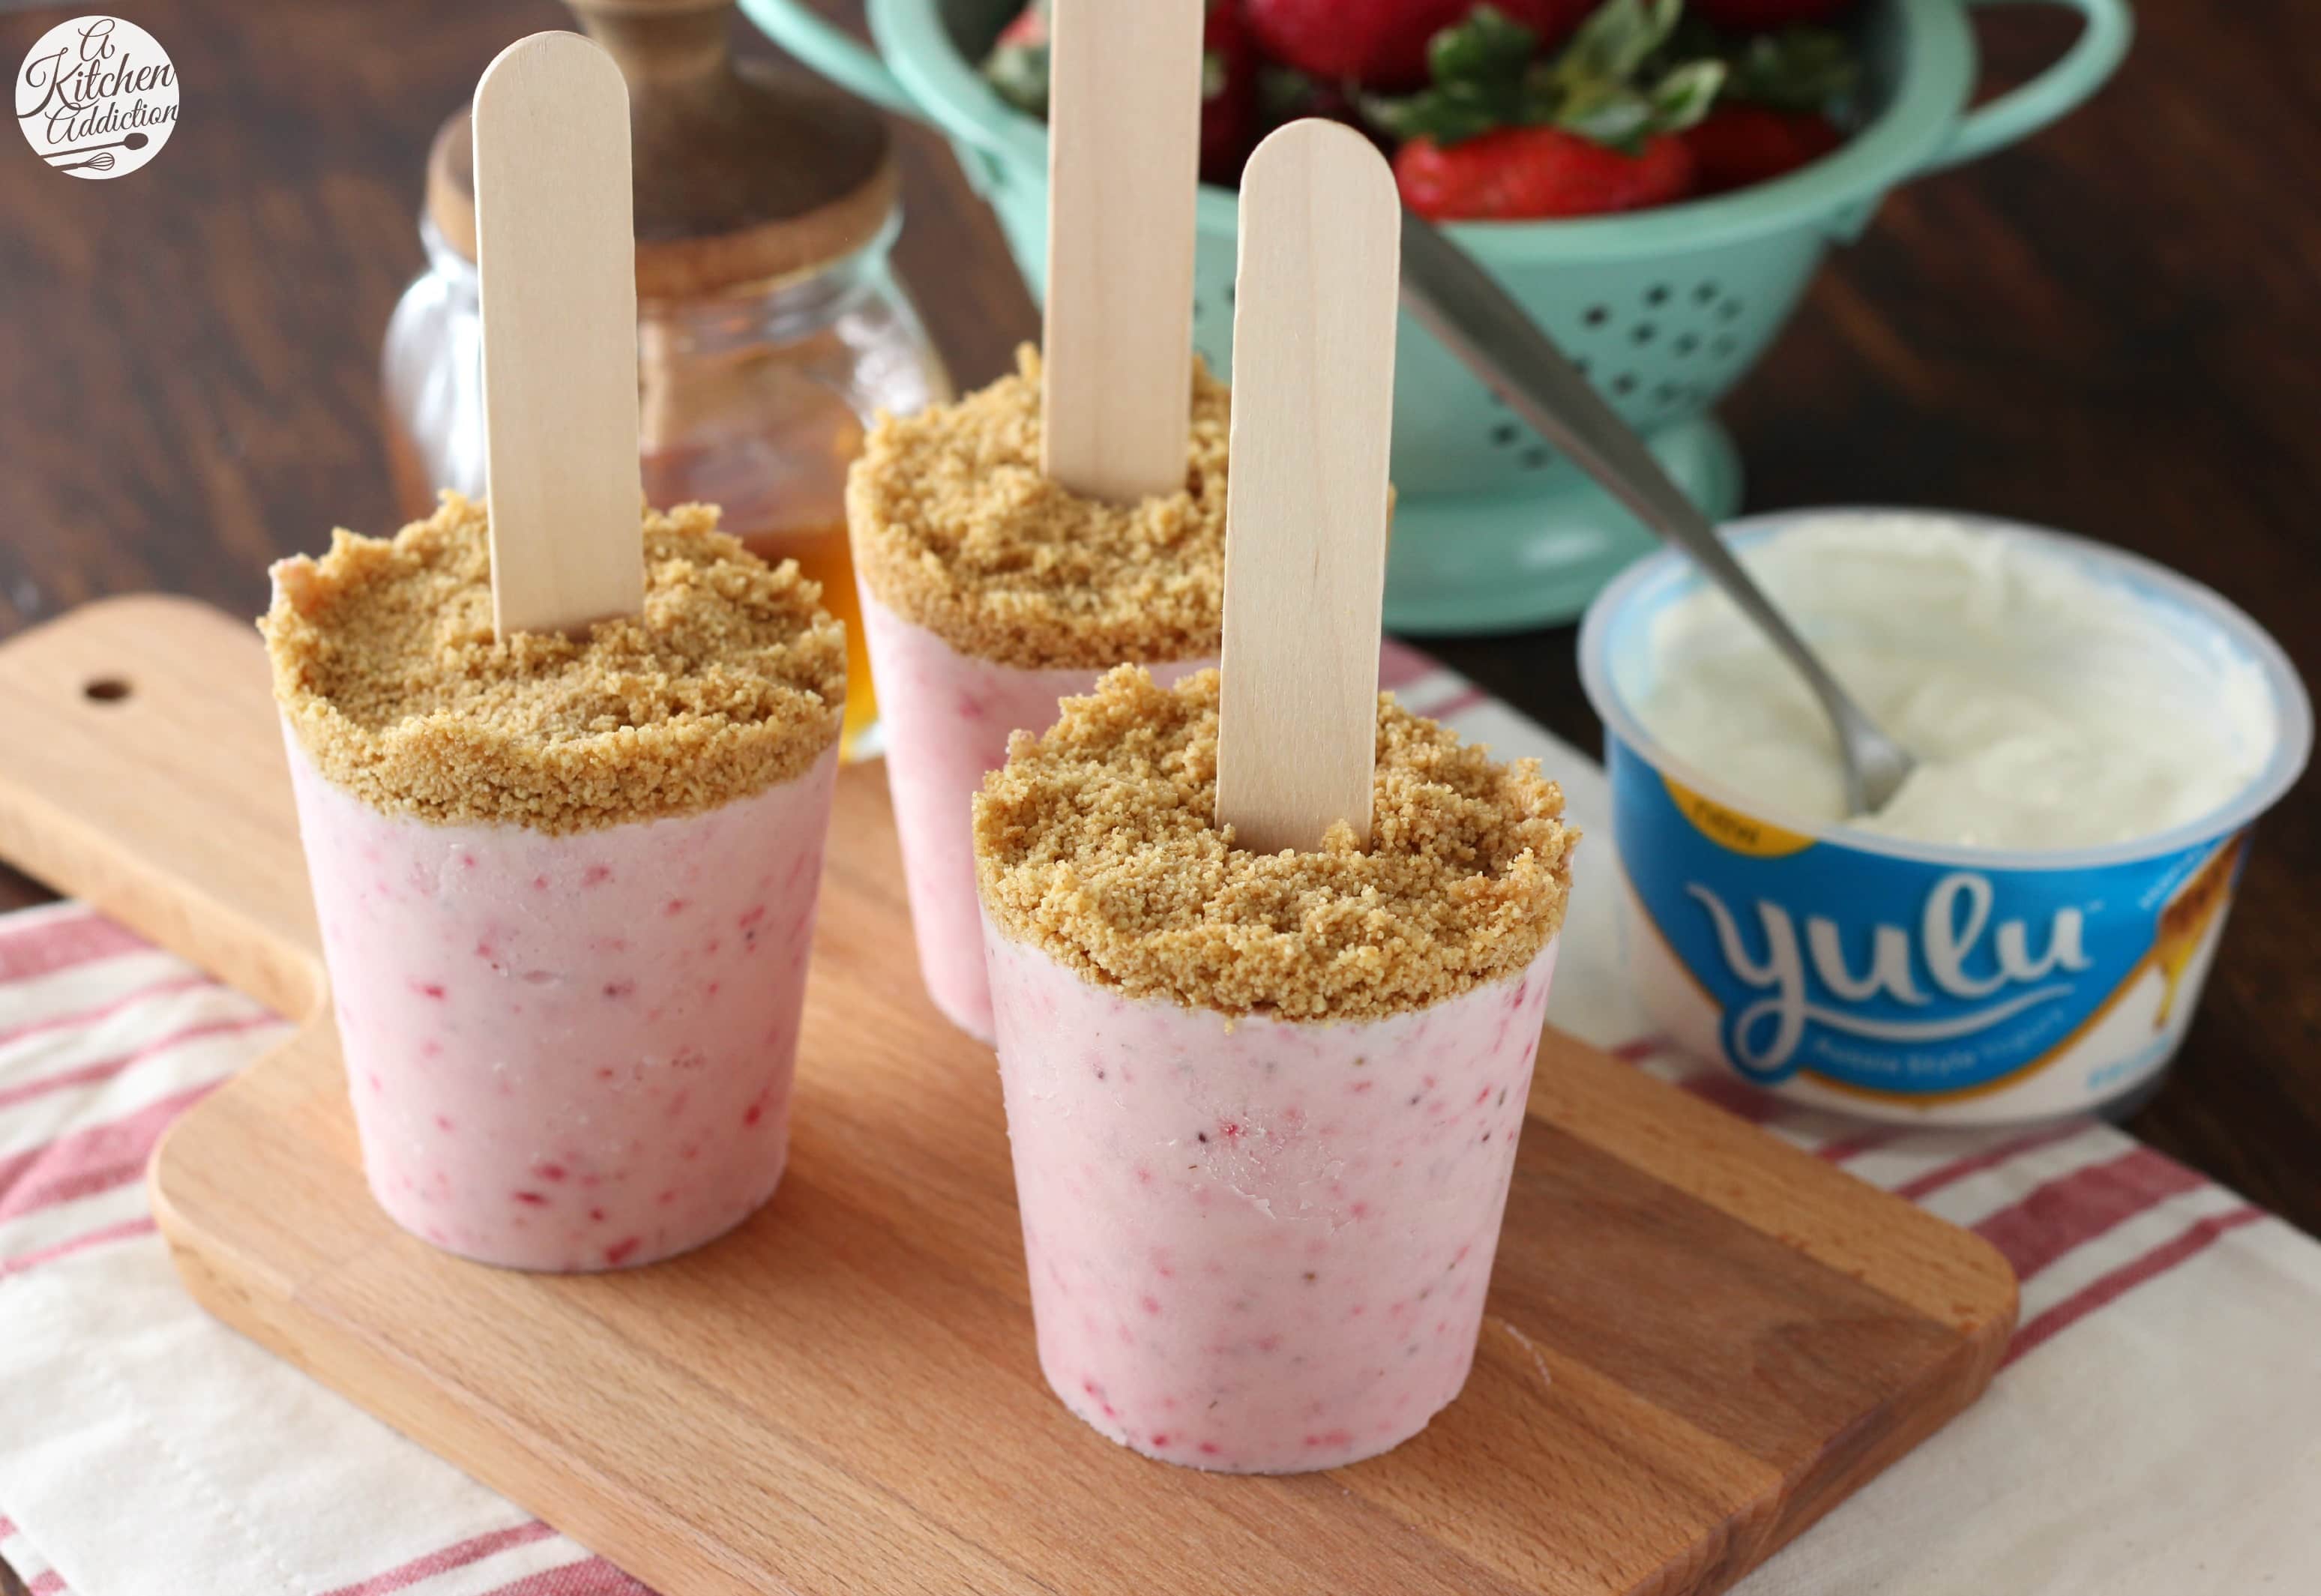 A Healthy Summer Snack - Strawberry Cheesecake Yogurt Pops from A Kitchen Addiction